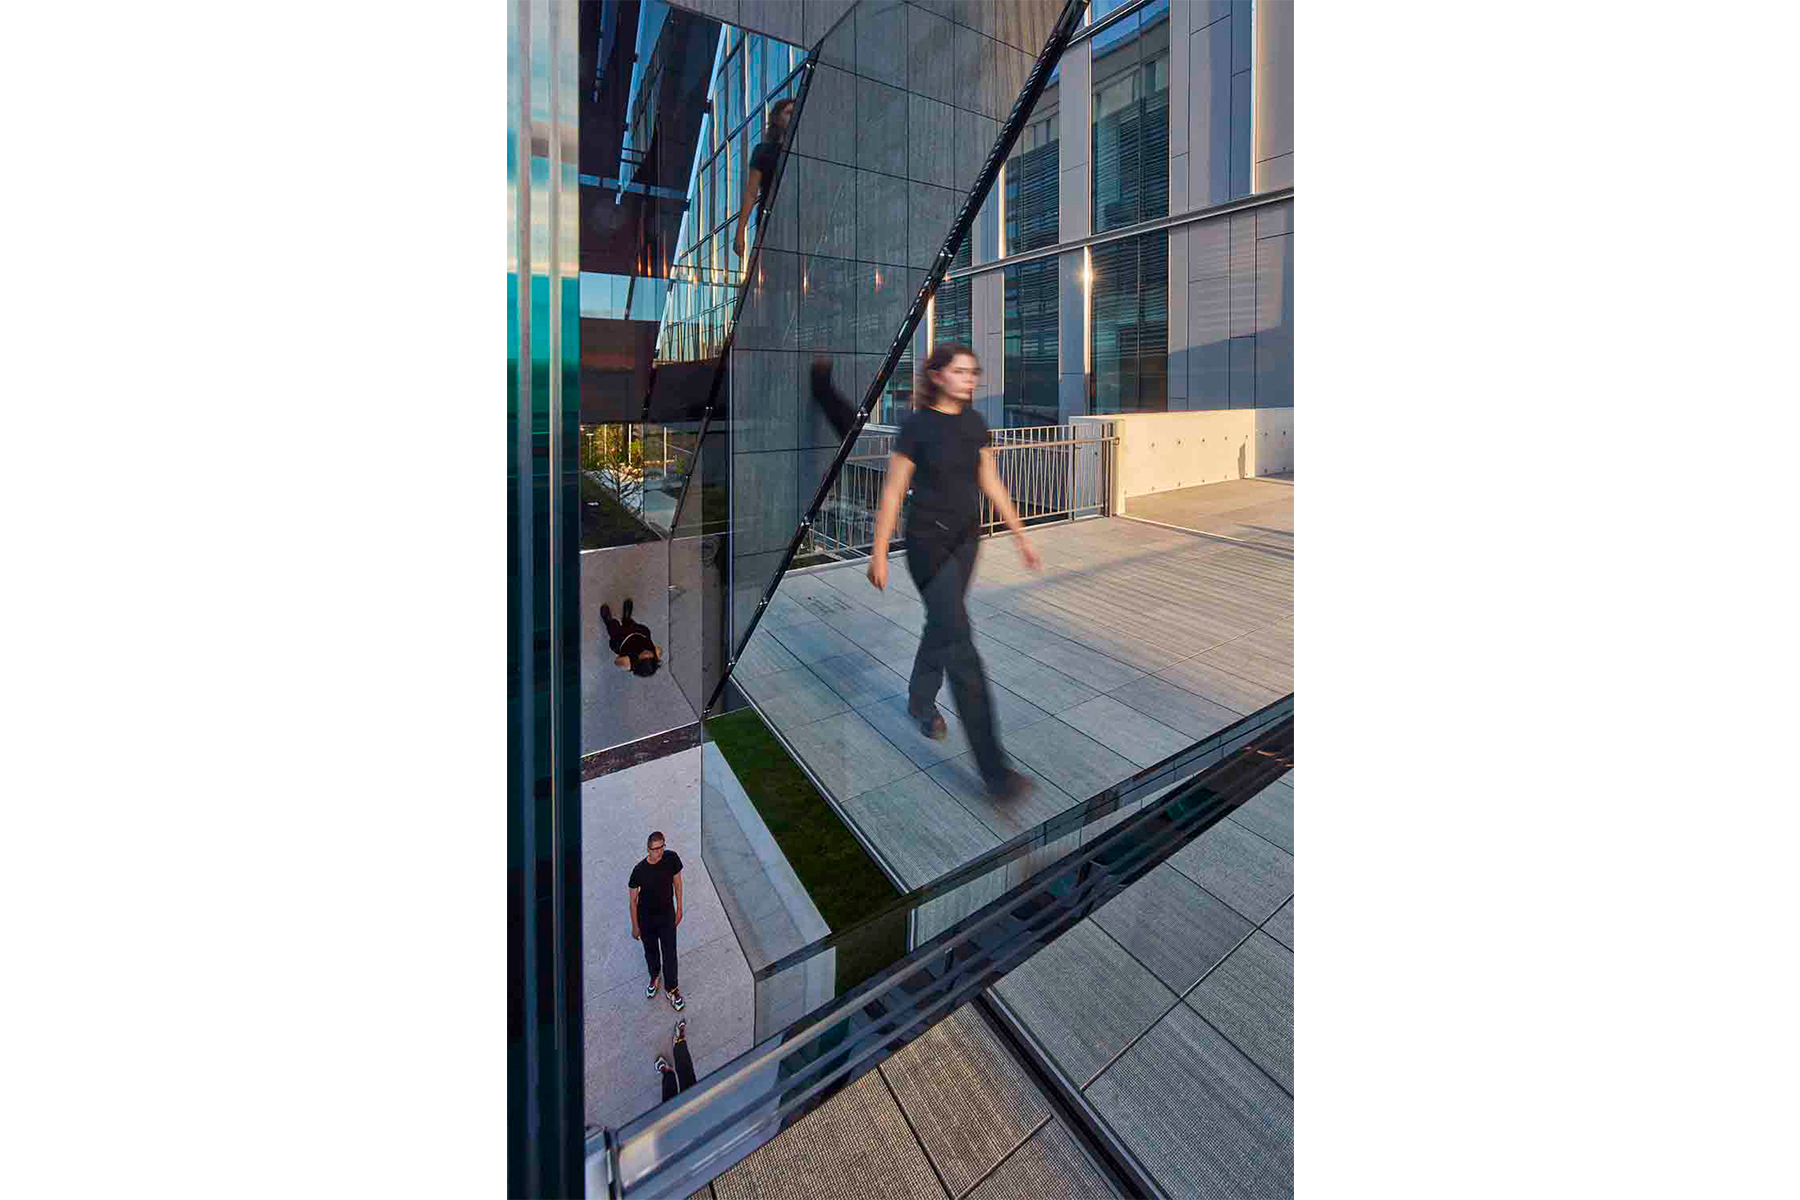 Sculpture made of glass panes with person walking past